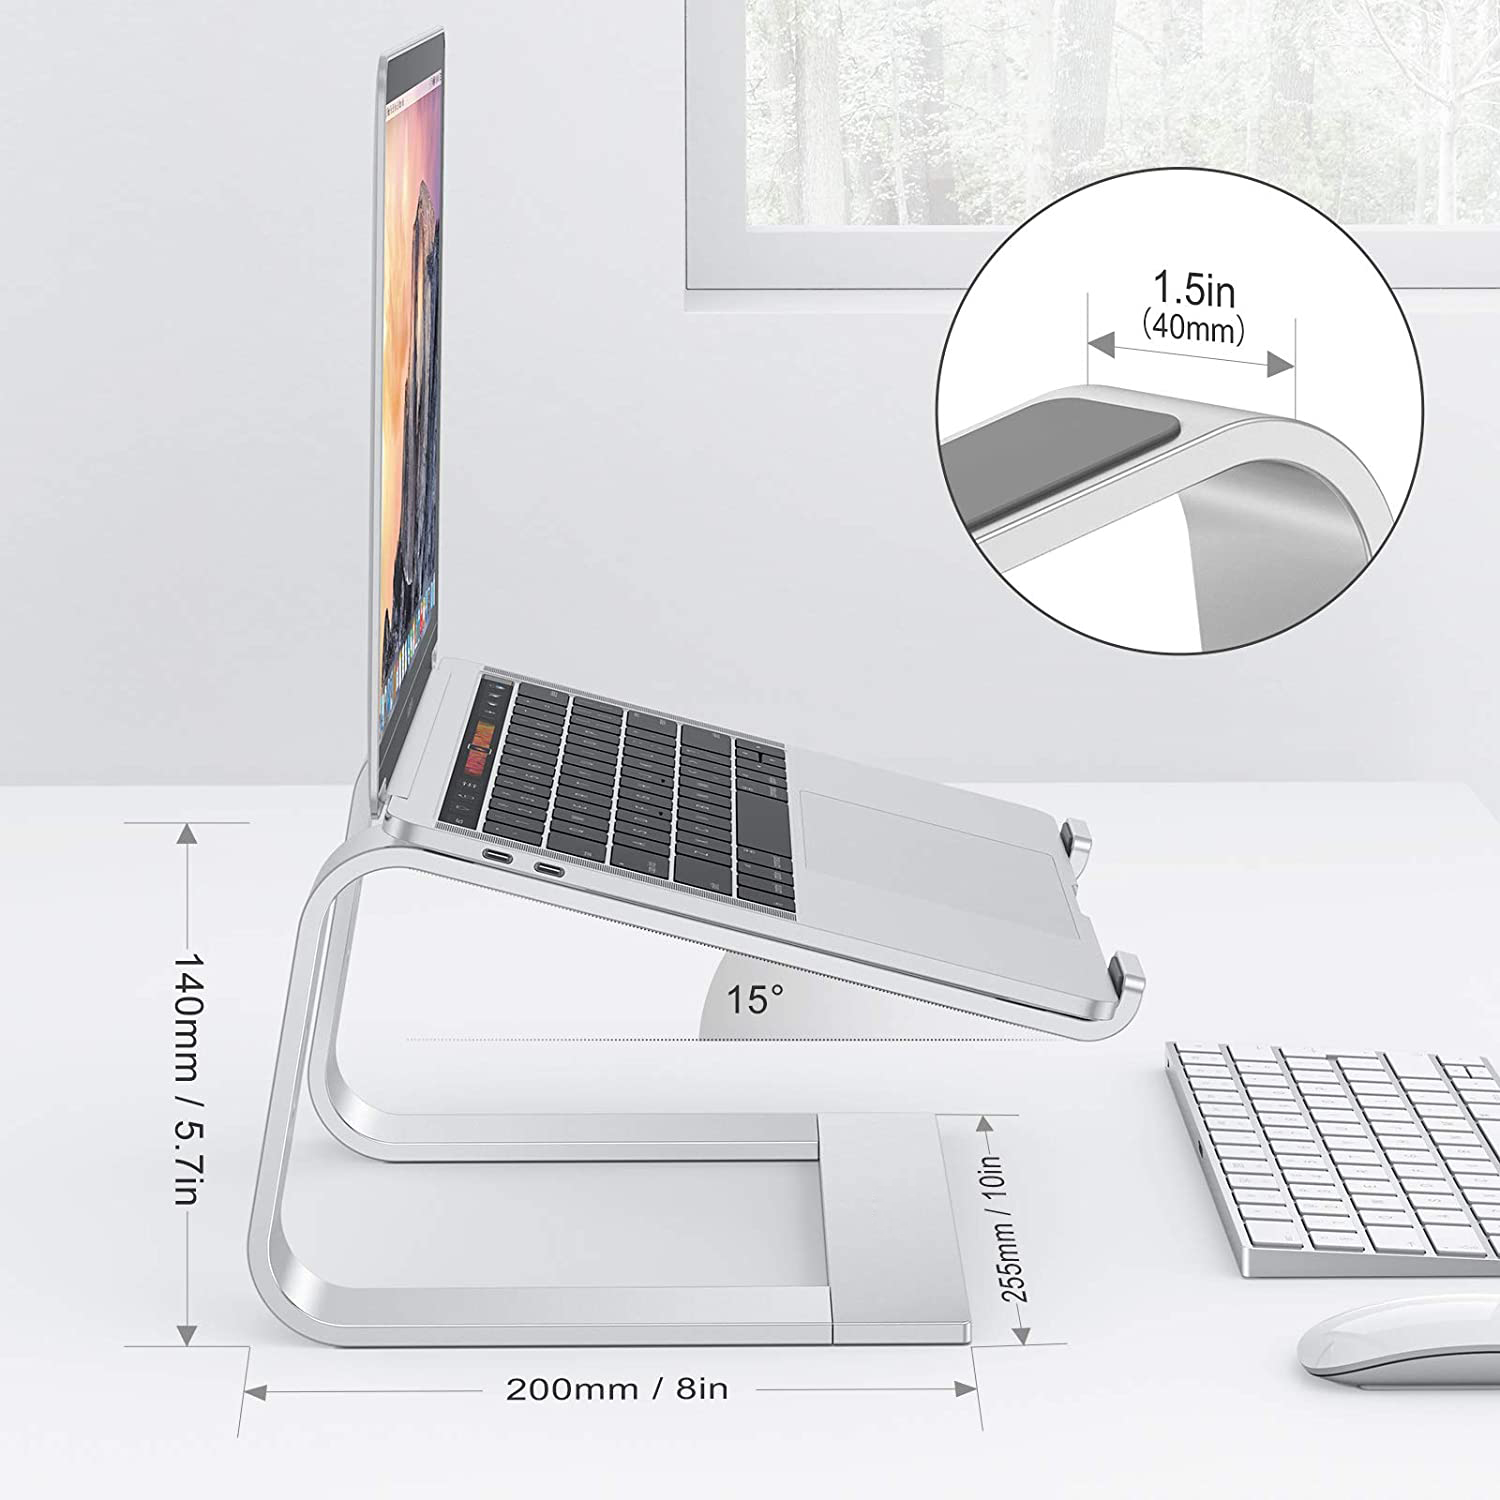 Laptop-Accessories-Laptop-Stand-Holder-Aluminum-Ergonomic-Computer-Stand-Labtop-Riser-Detachable-Notebook-Stand-Heavy-Tablet-Stand-for-10-15-6-Laptops-118